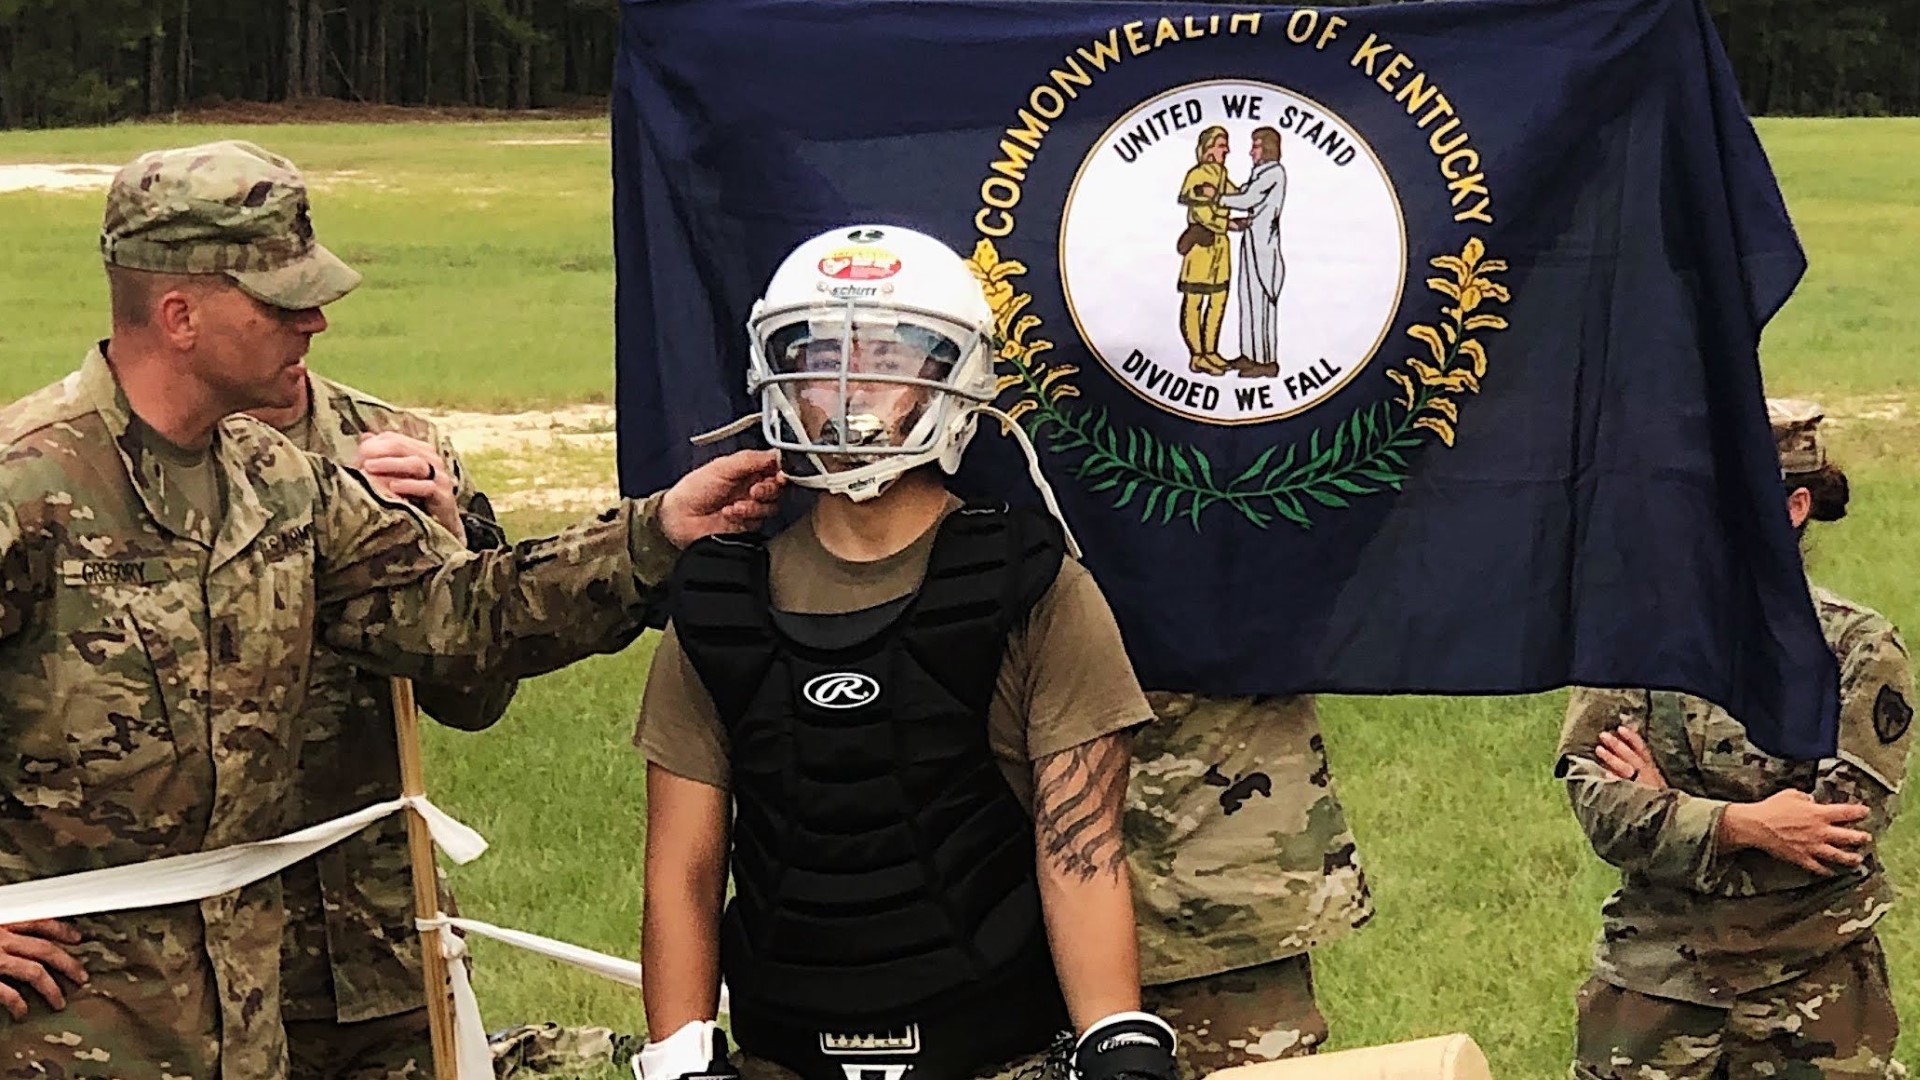 Spc. Aydin T. Chester of A Battery, 2/138th Field Artillery from Carrollton, Kentucky is the winner of the Region III Best Warrior Competition in South Carolina.